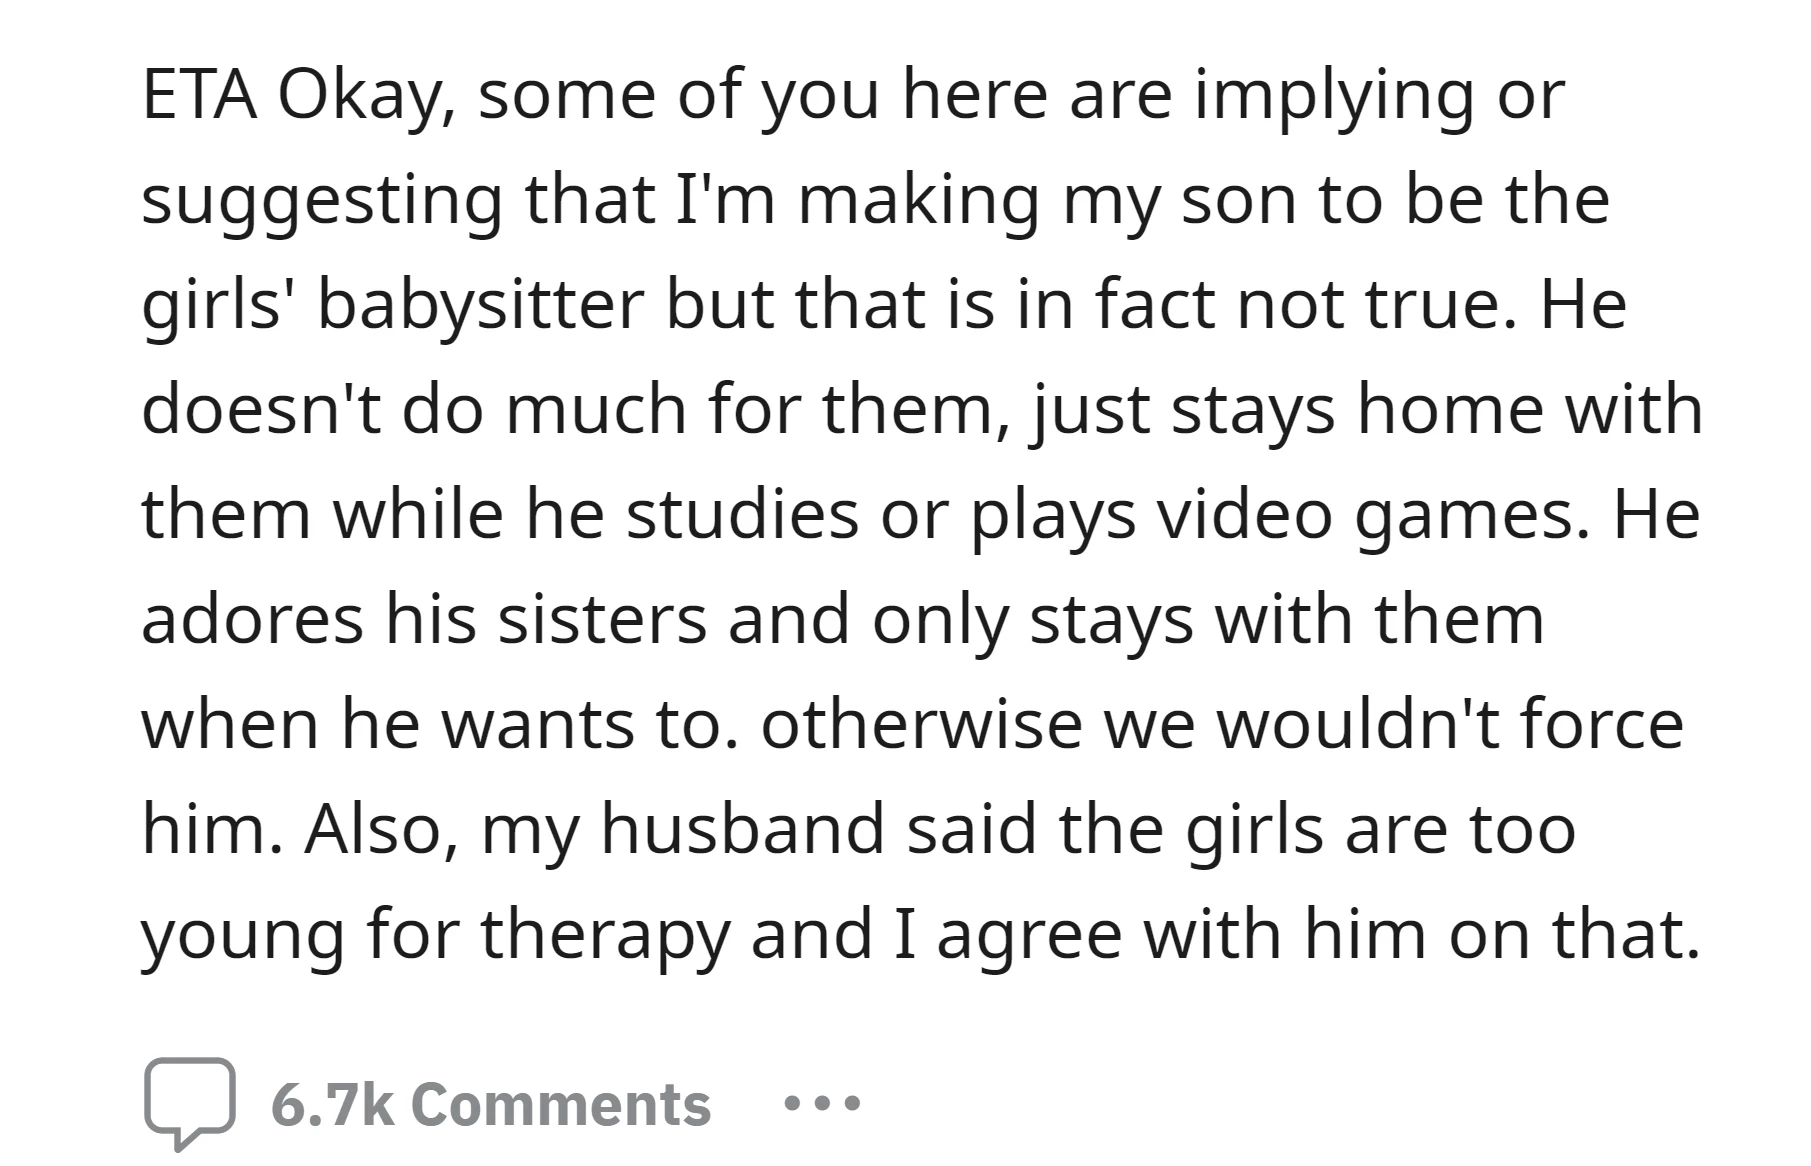 The OP clarifies that they don't make their son babysit the girls, as he only stays with them voluntarily